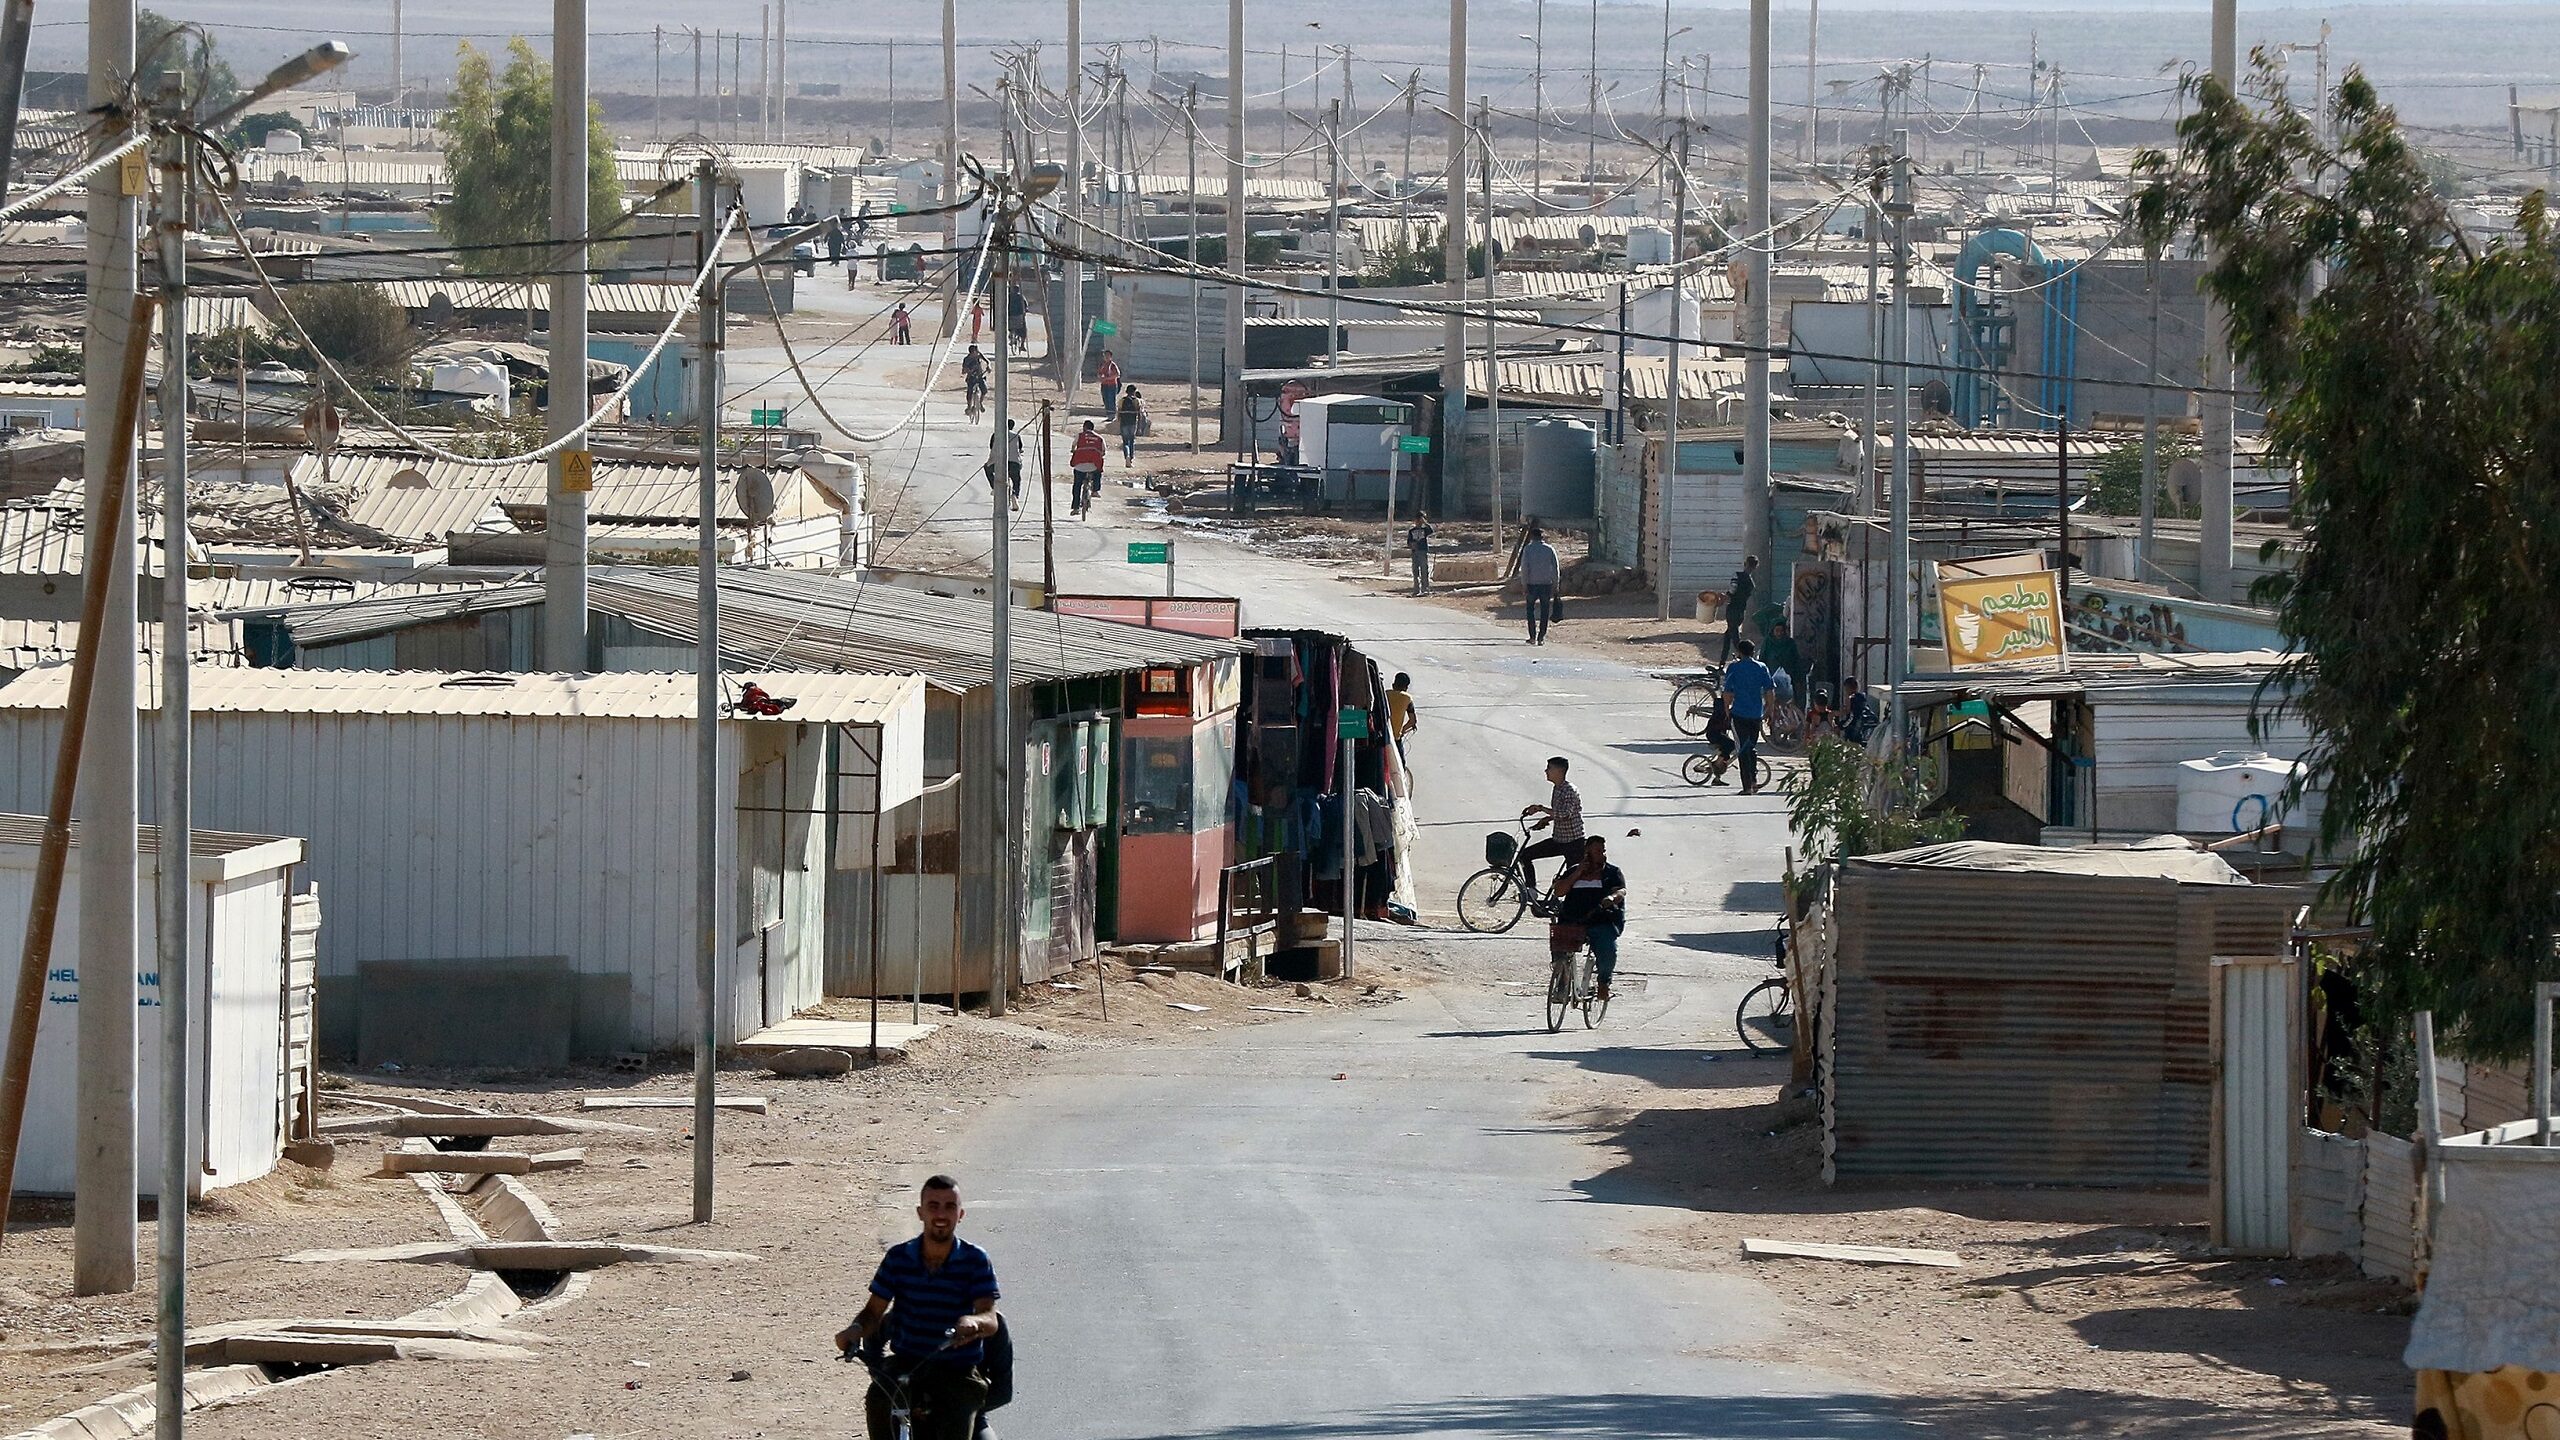 UN Aid Cuts to Syrian Refugees in Jordan May Aim To Force Their Return